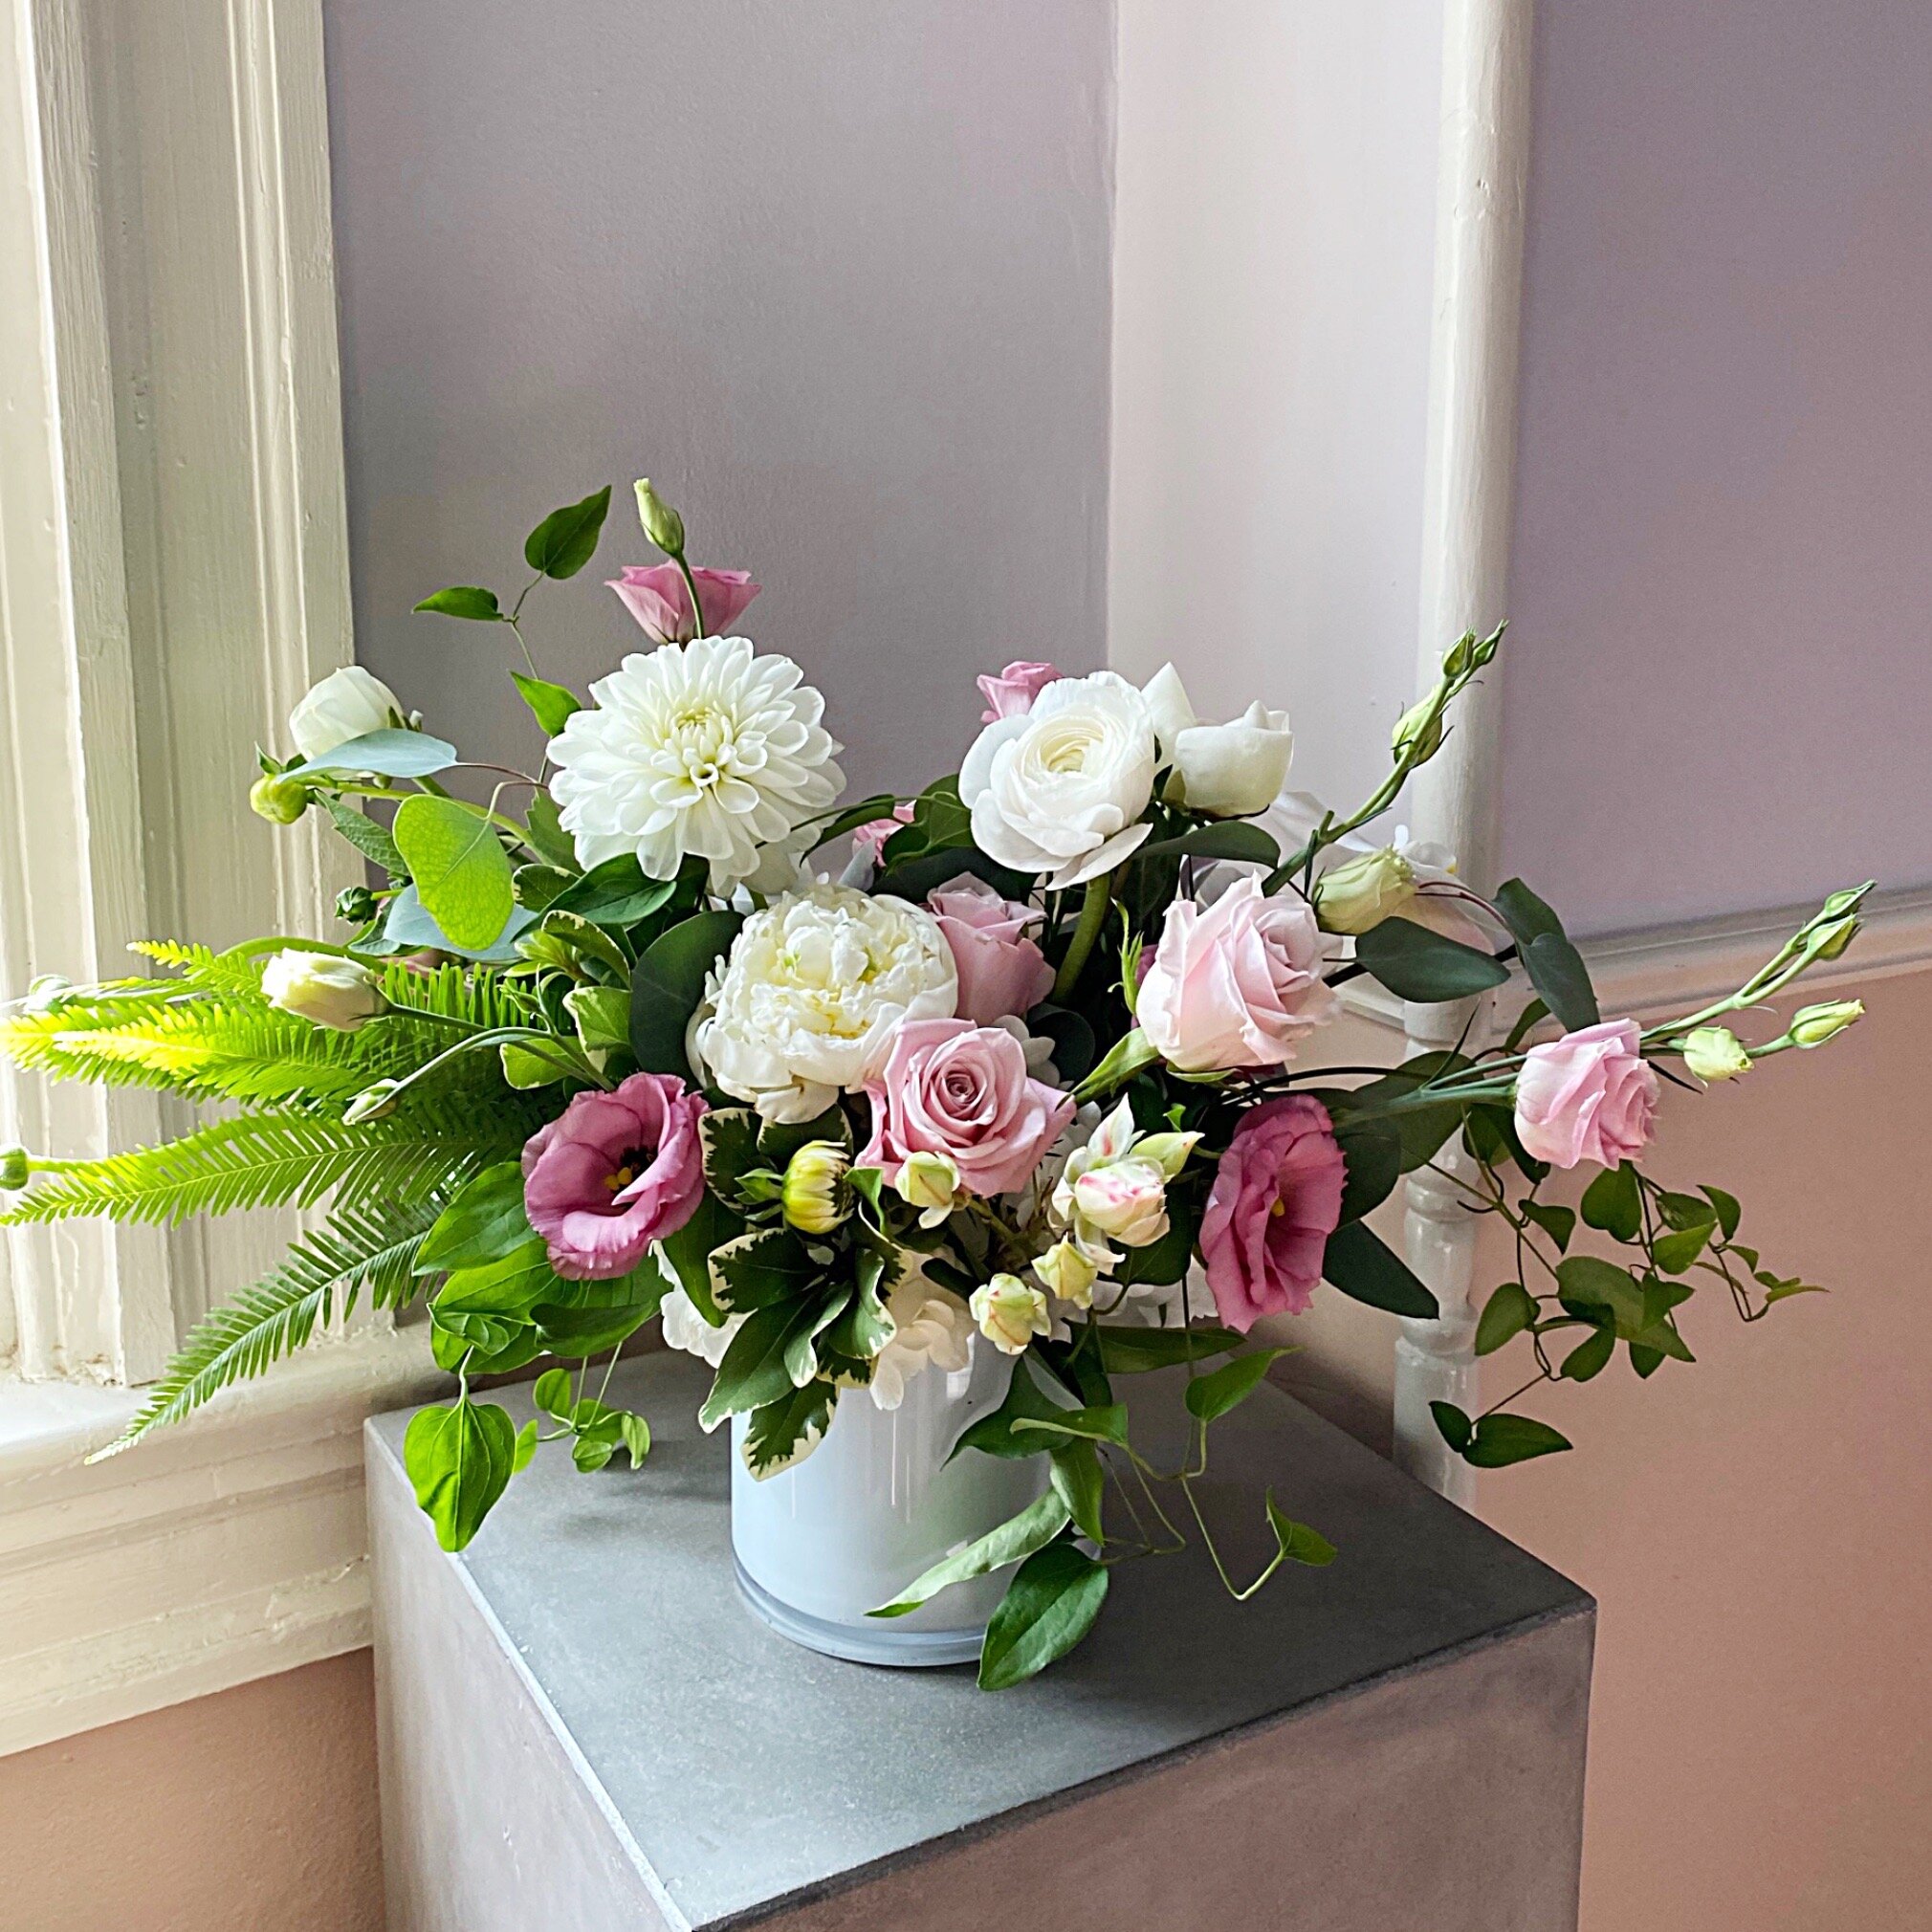 Airy White and Pink flowers with greenery - Atelier Ashley Flowers